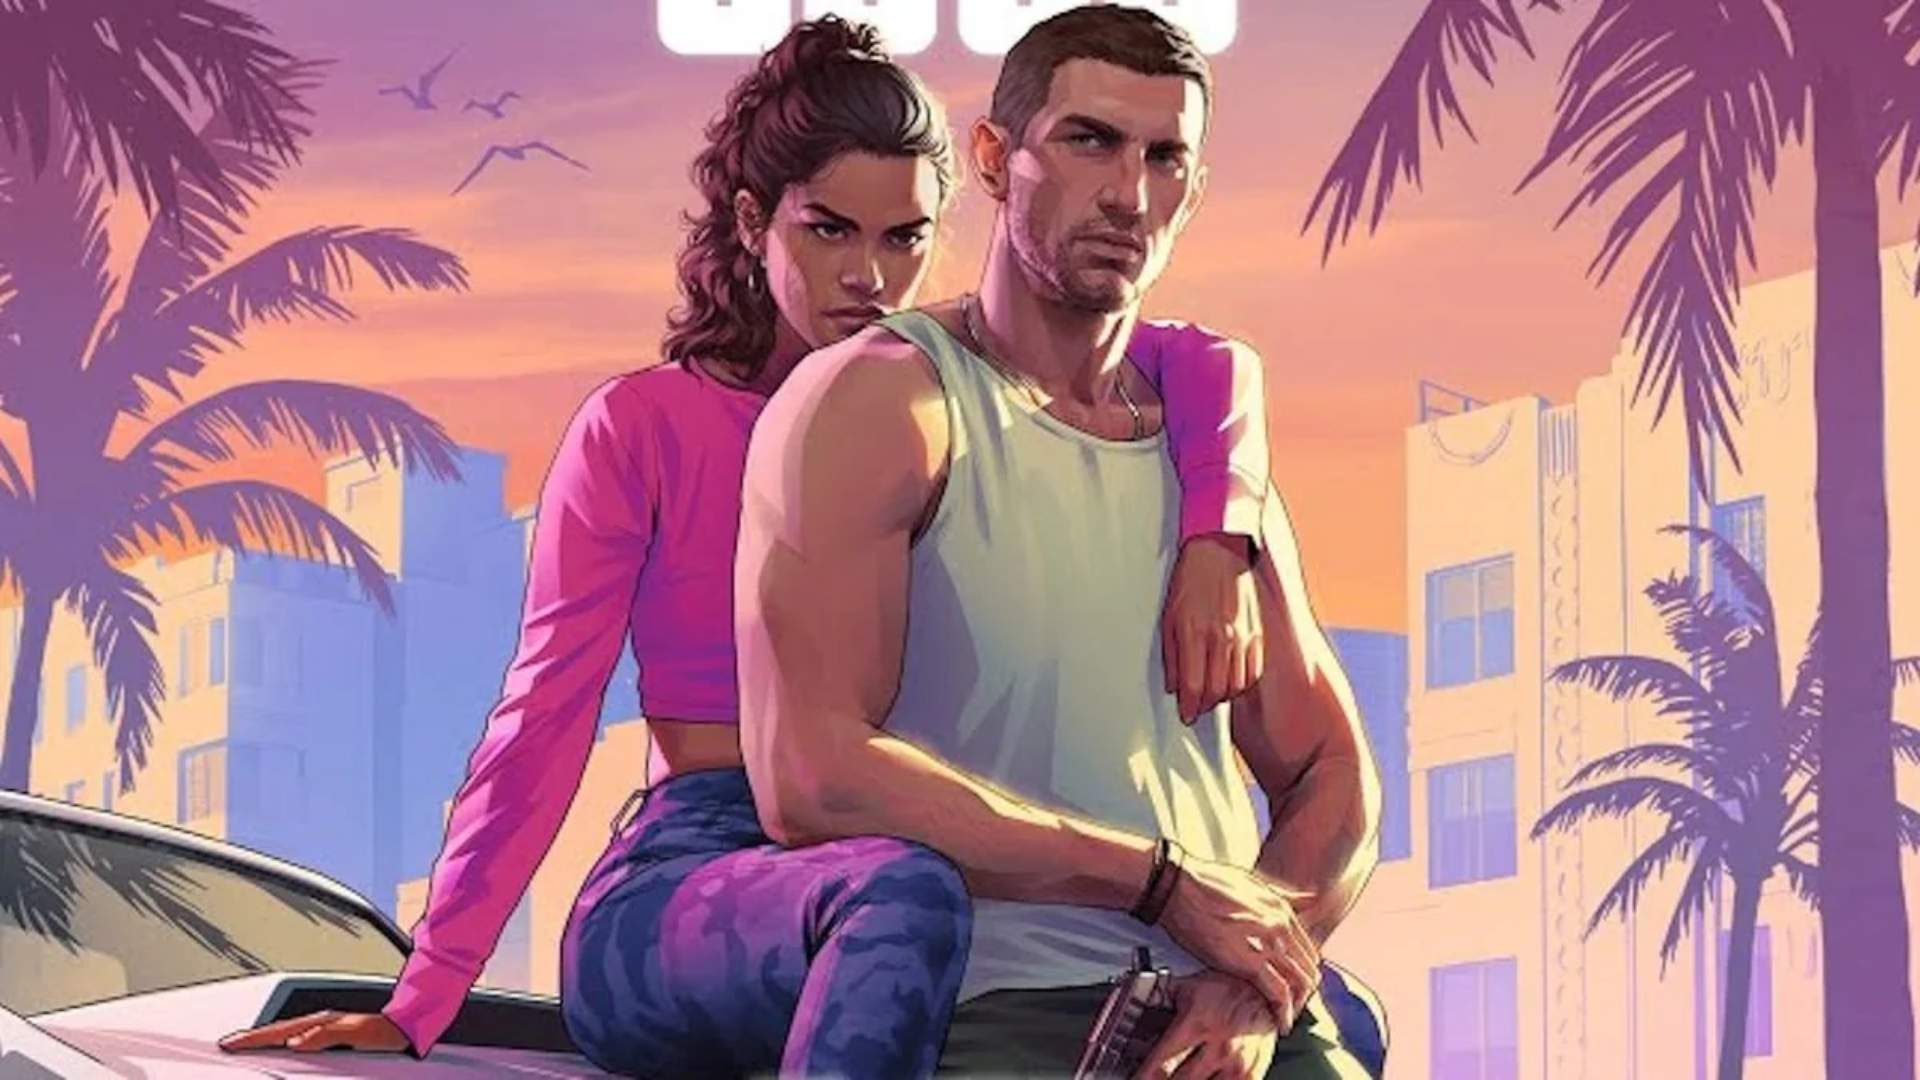 Does Grand Theft Auto 6 deliver the generational leap we were